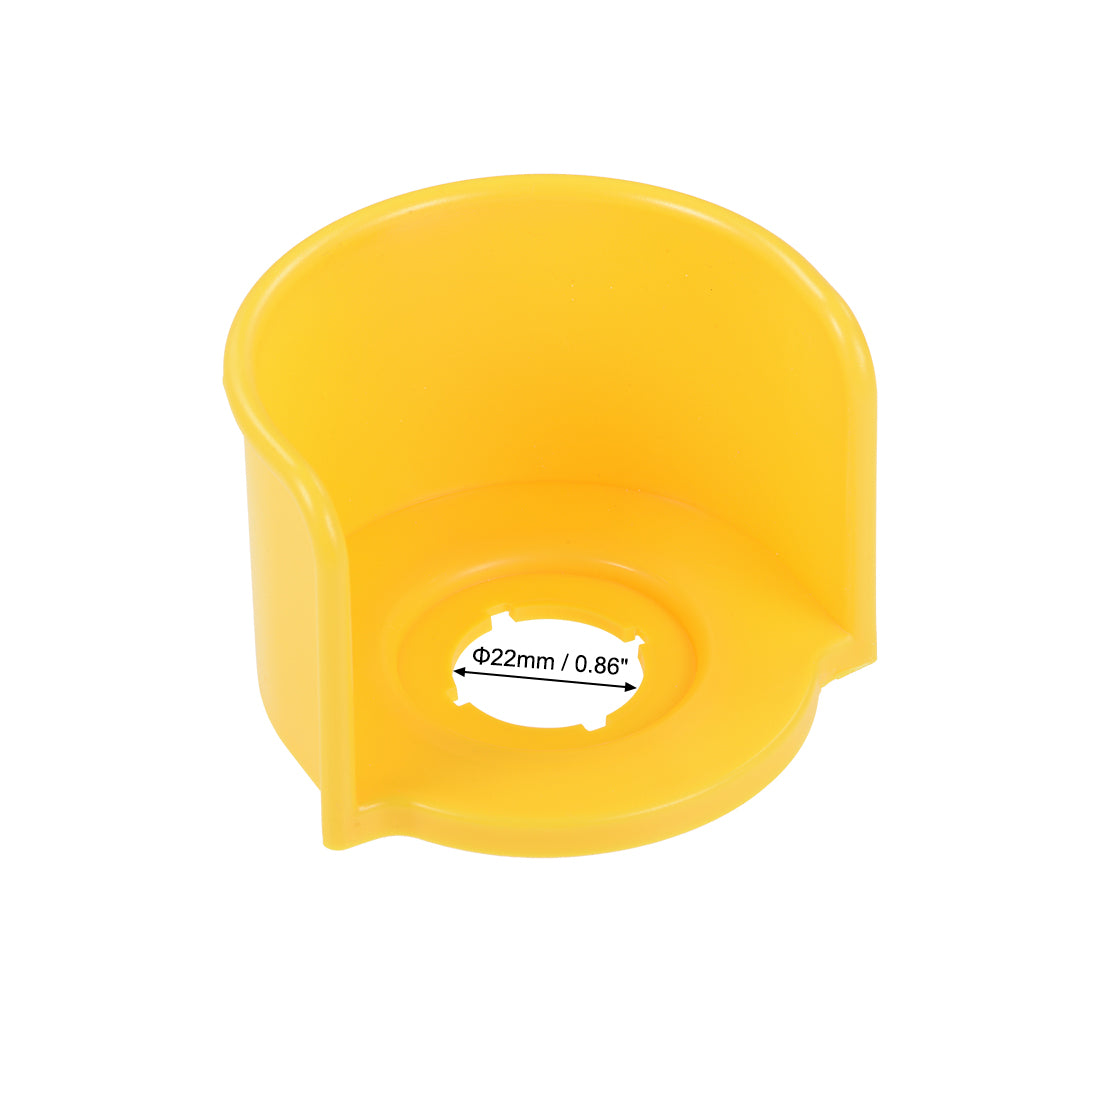 Uxcell Uxcell 22mm Plastic Half Circle Emergency Stop Switch Push Button Protective Cover Yellow 72x72x48mm 2pcs